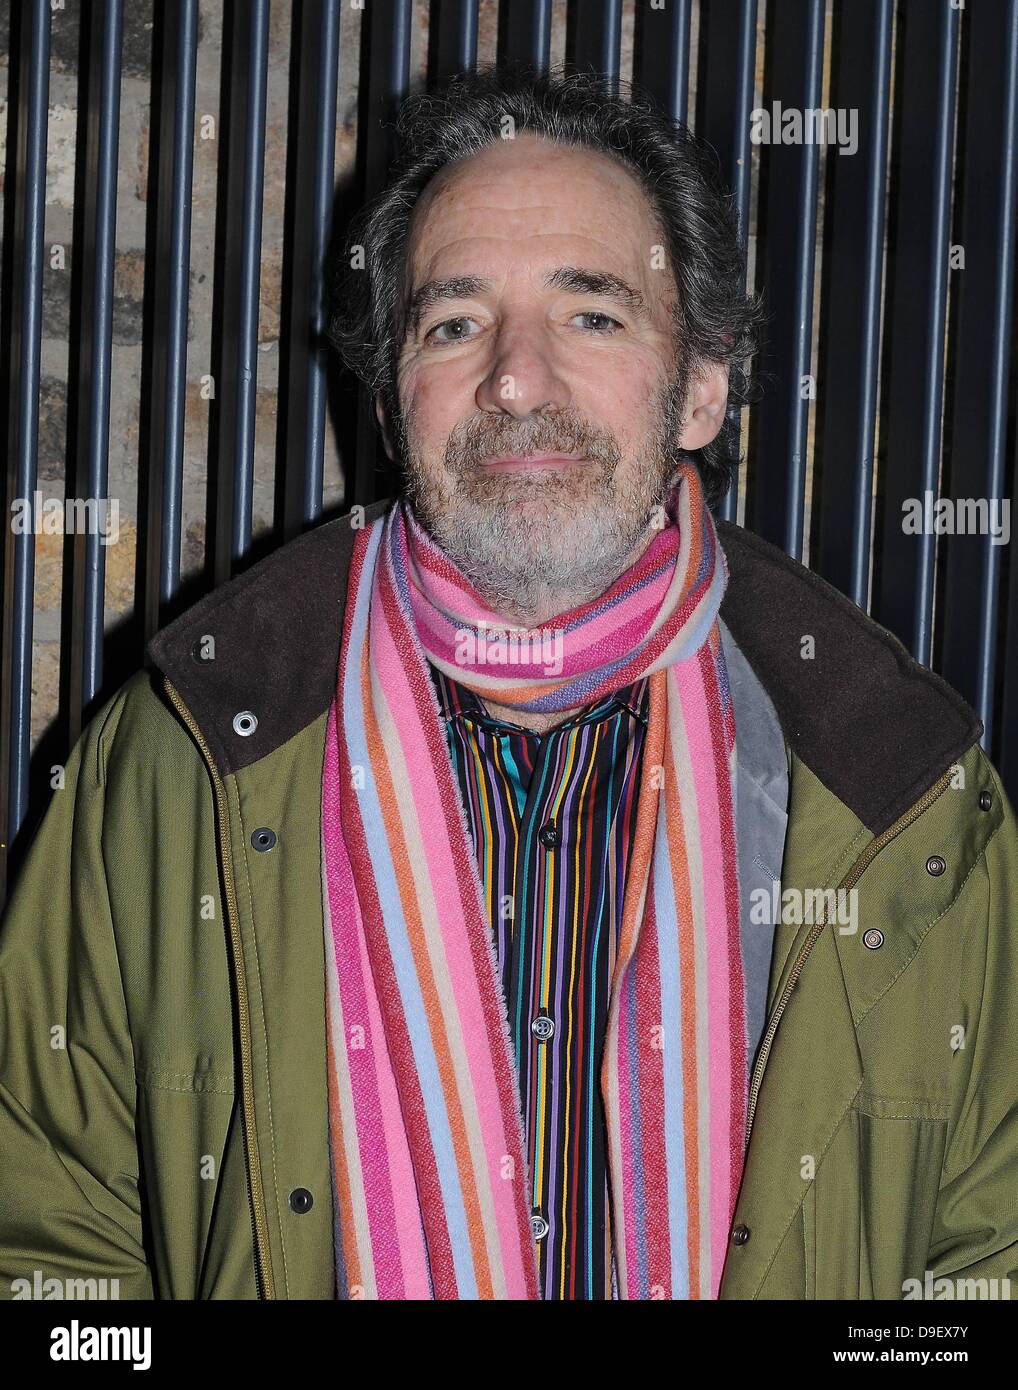 Harry Shearer The voice behind The Simpsons characters Mr. Burns, Smithers, Ned Flanders at a screening of 'The Big Uneasy' at the IFI as part of the Jameson Dublin International Film Festival Dublin, Ireland - 22.02.11 Stock Photo